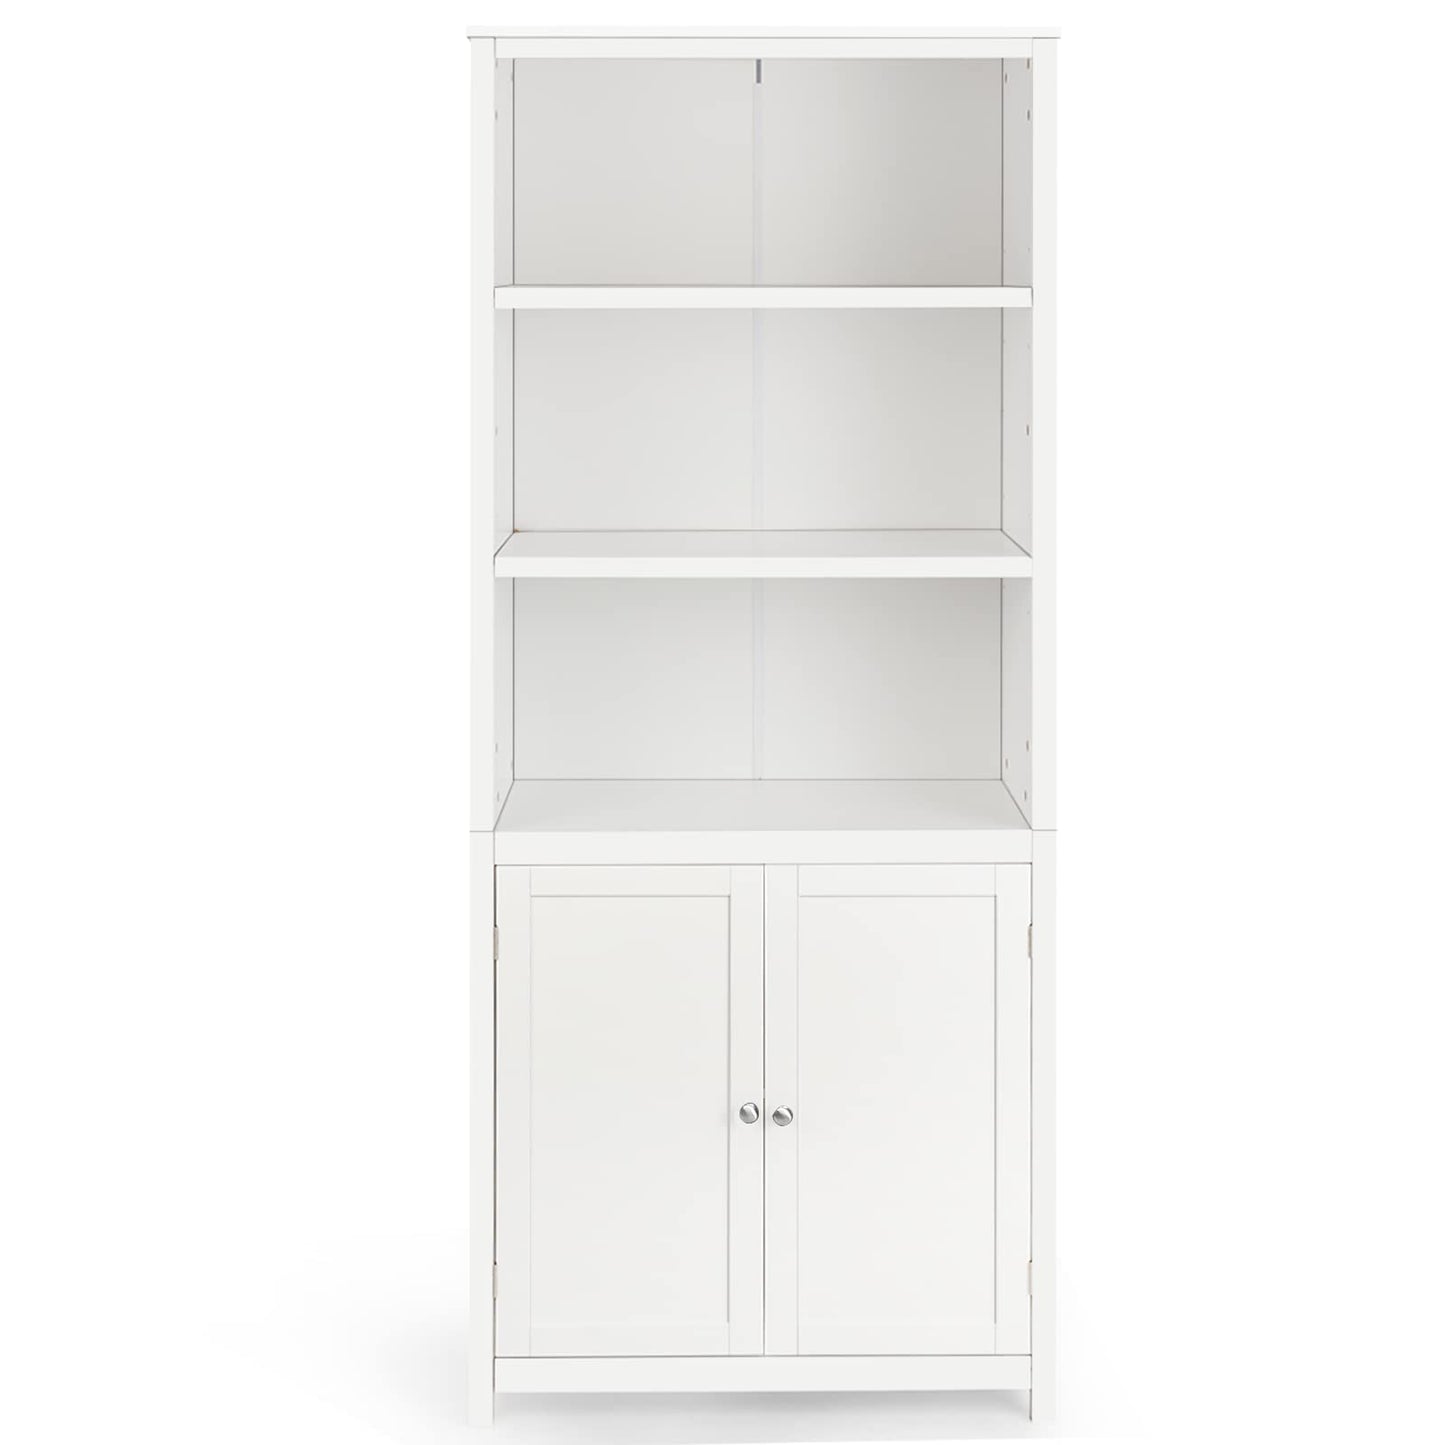 Tangkula Bookcase with Doors, 3 Tier Open Book Shelving, Standing Wooden Display Bookcase with Double Doors, Ideal for Home Bedroom, Living Room,